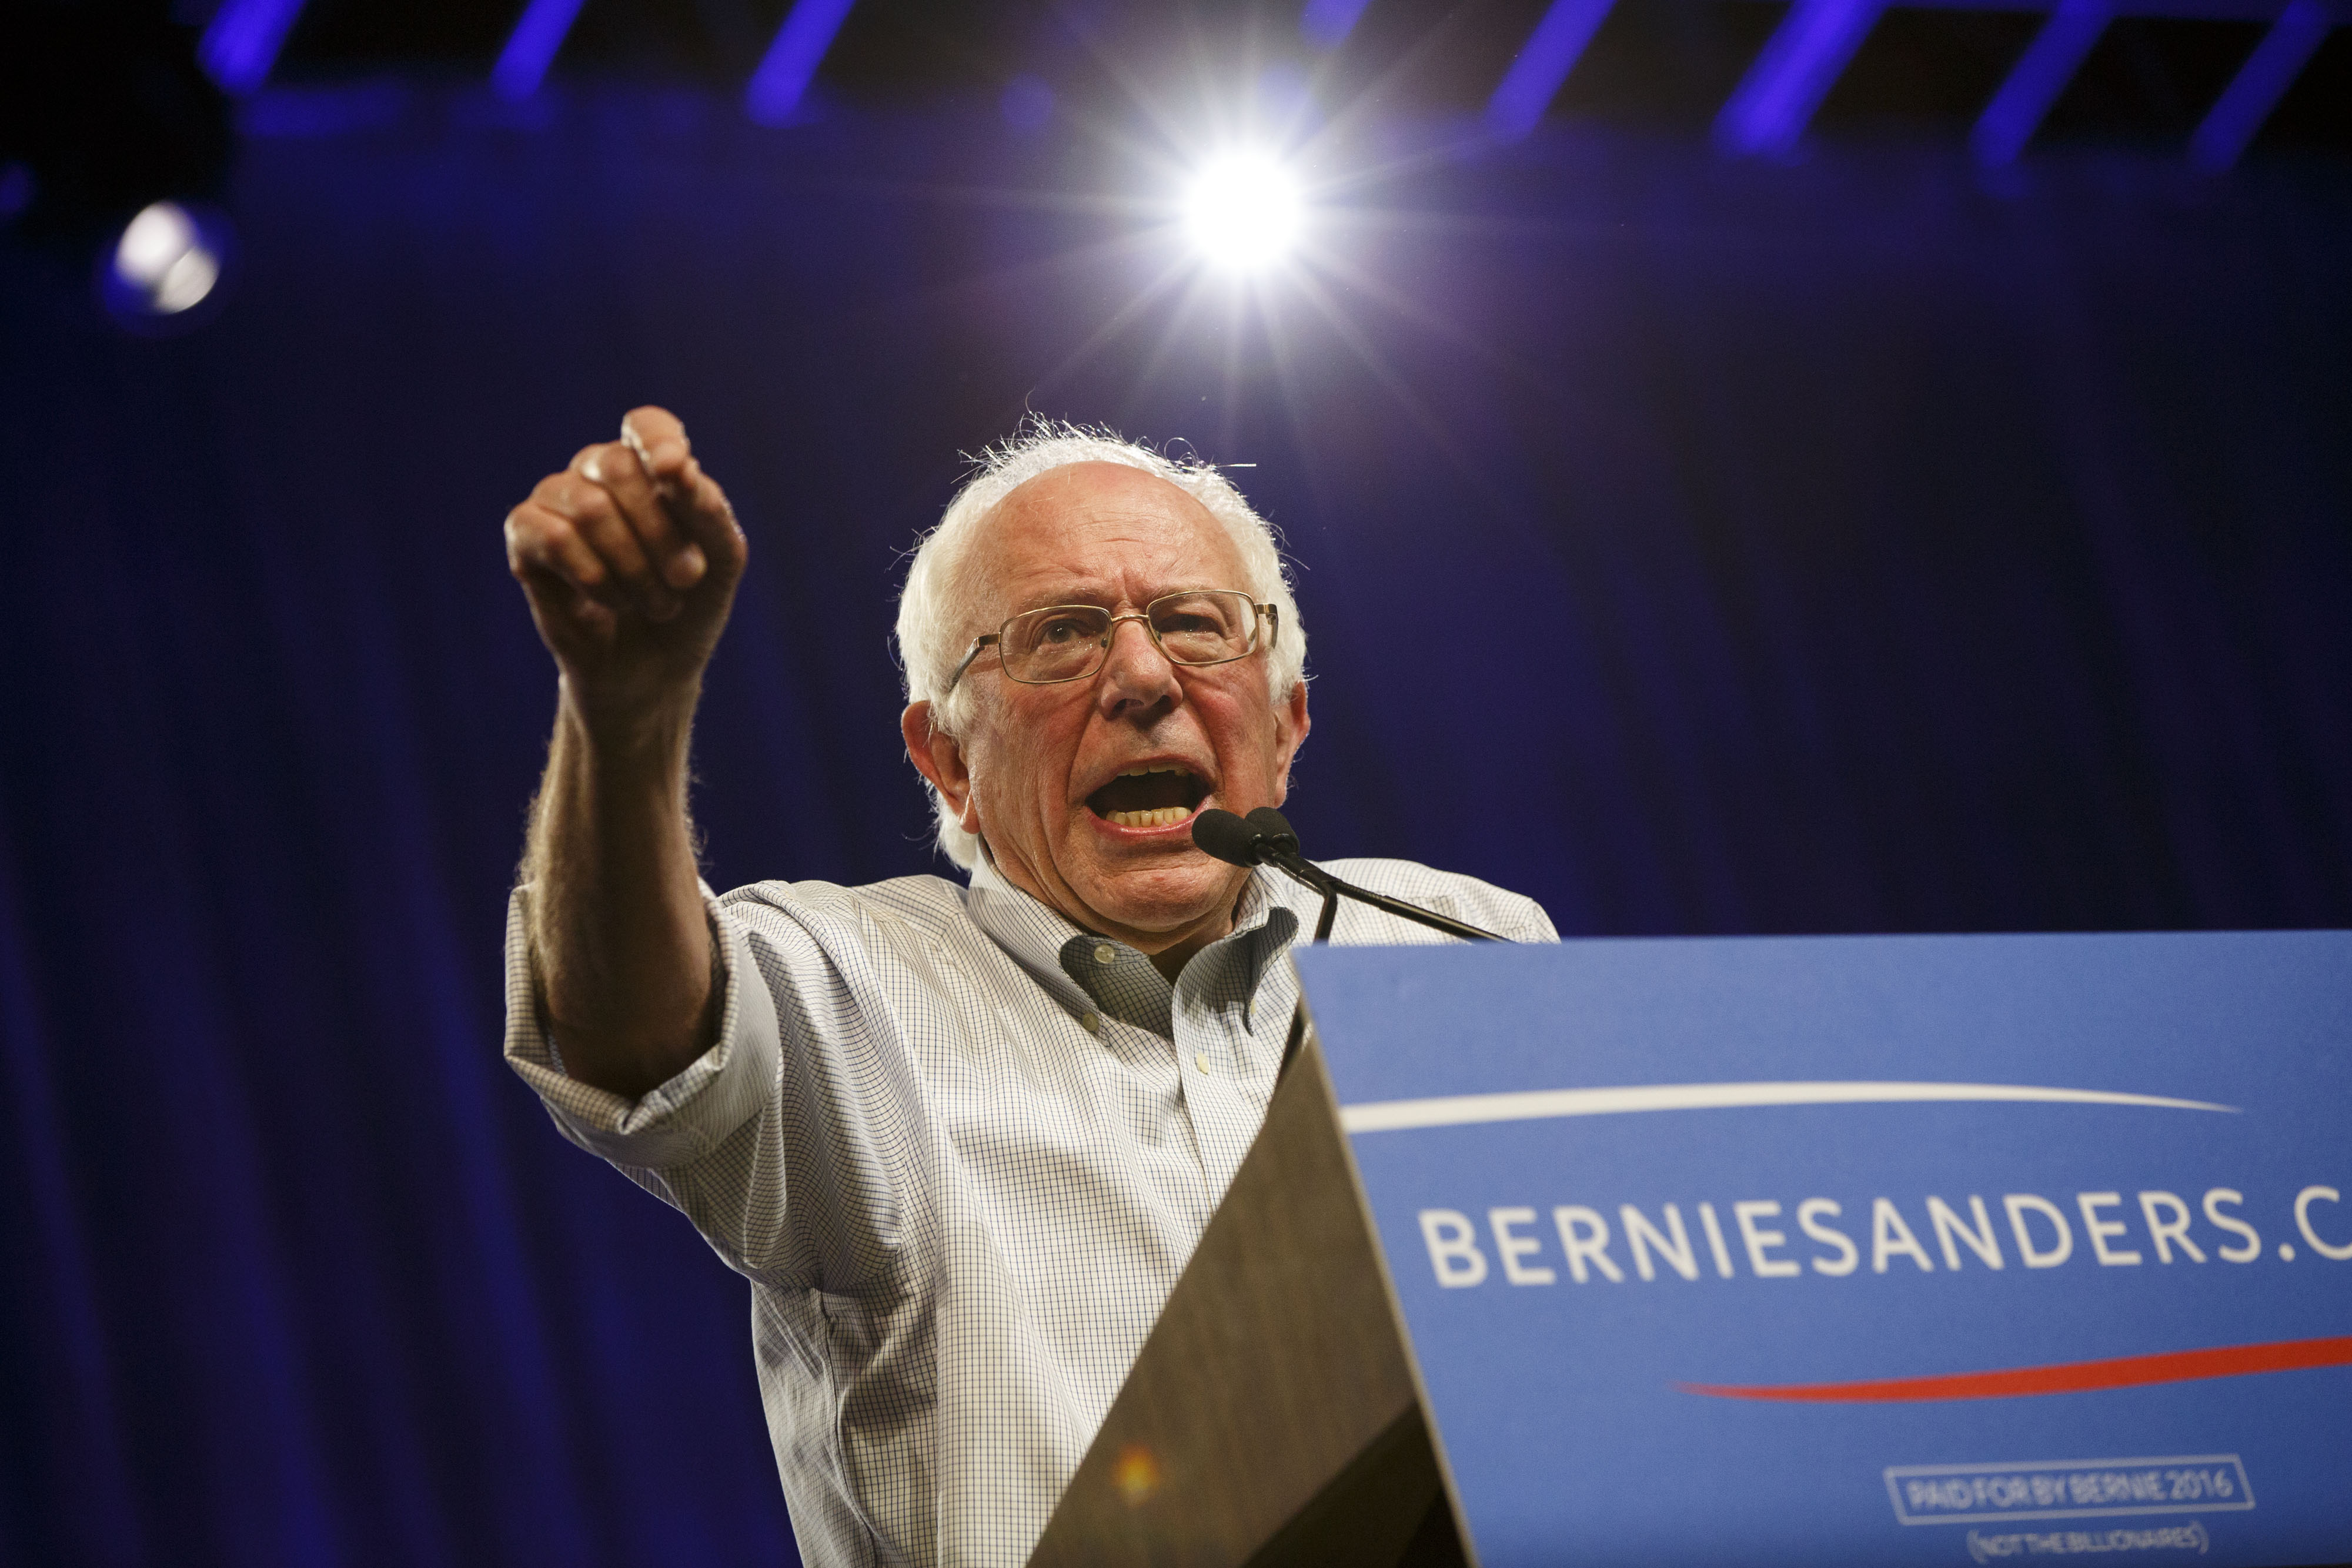 U.S. Senator Bernie Sanders gestures as he speaks during a campaign event at the LA Memorial Sports Arena in Los Angeles on Aug. 10, 2015.